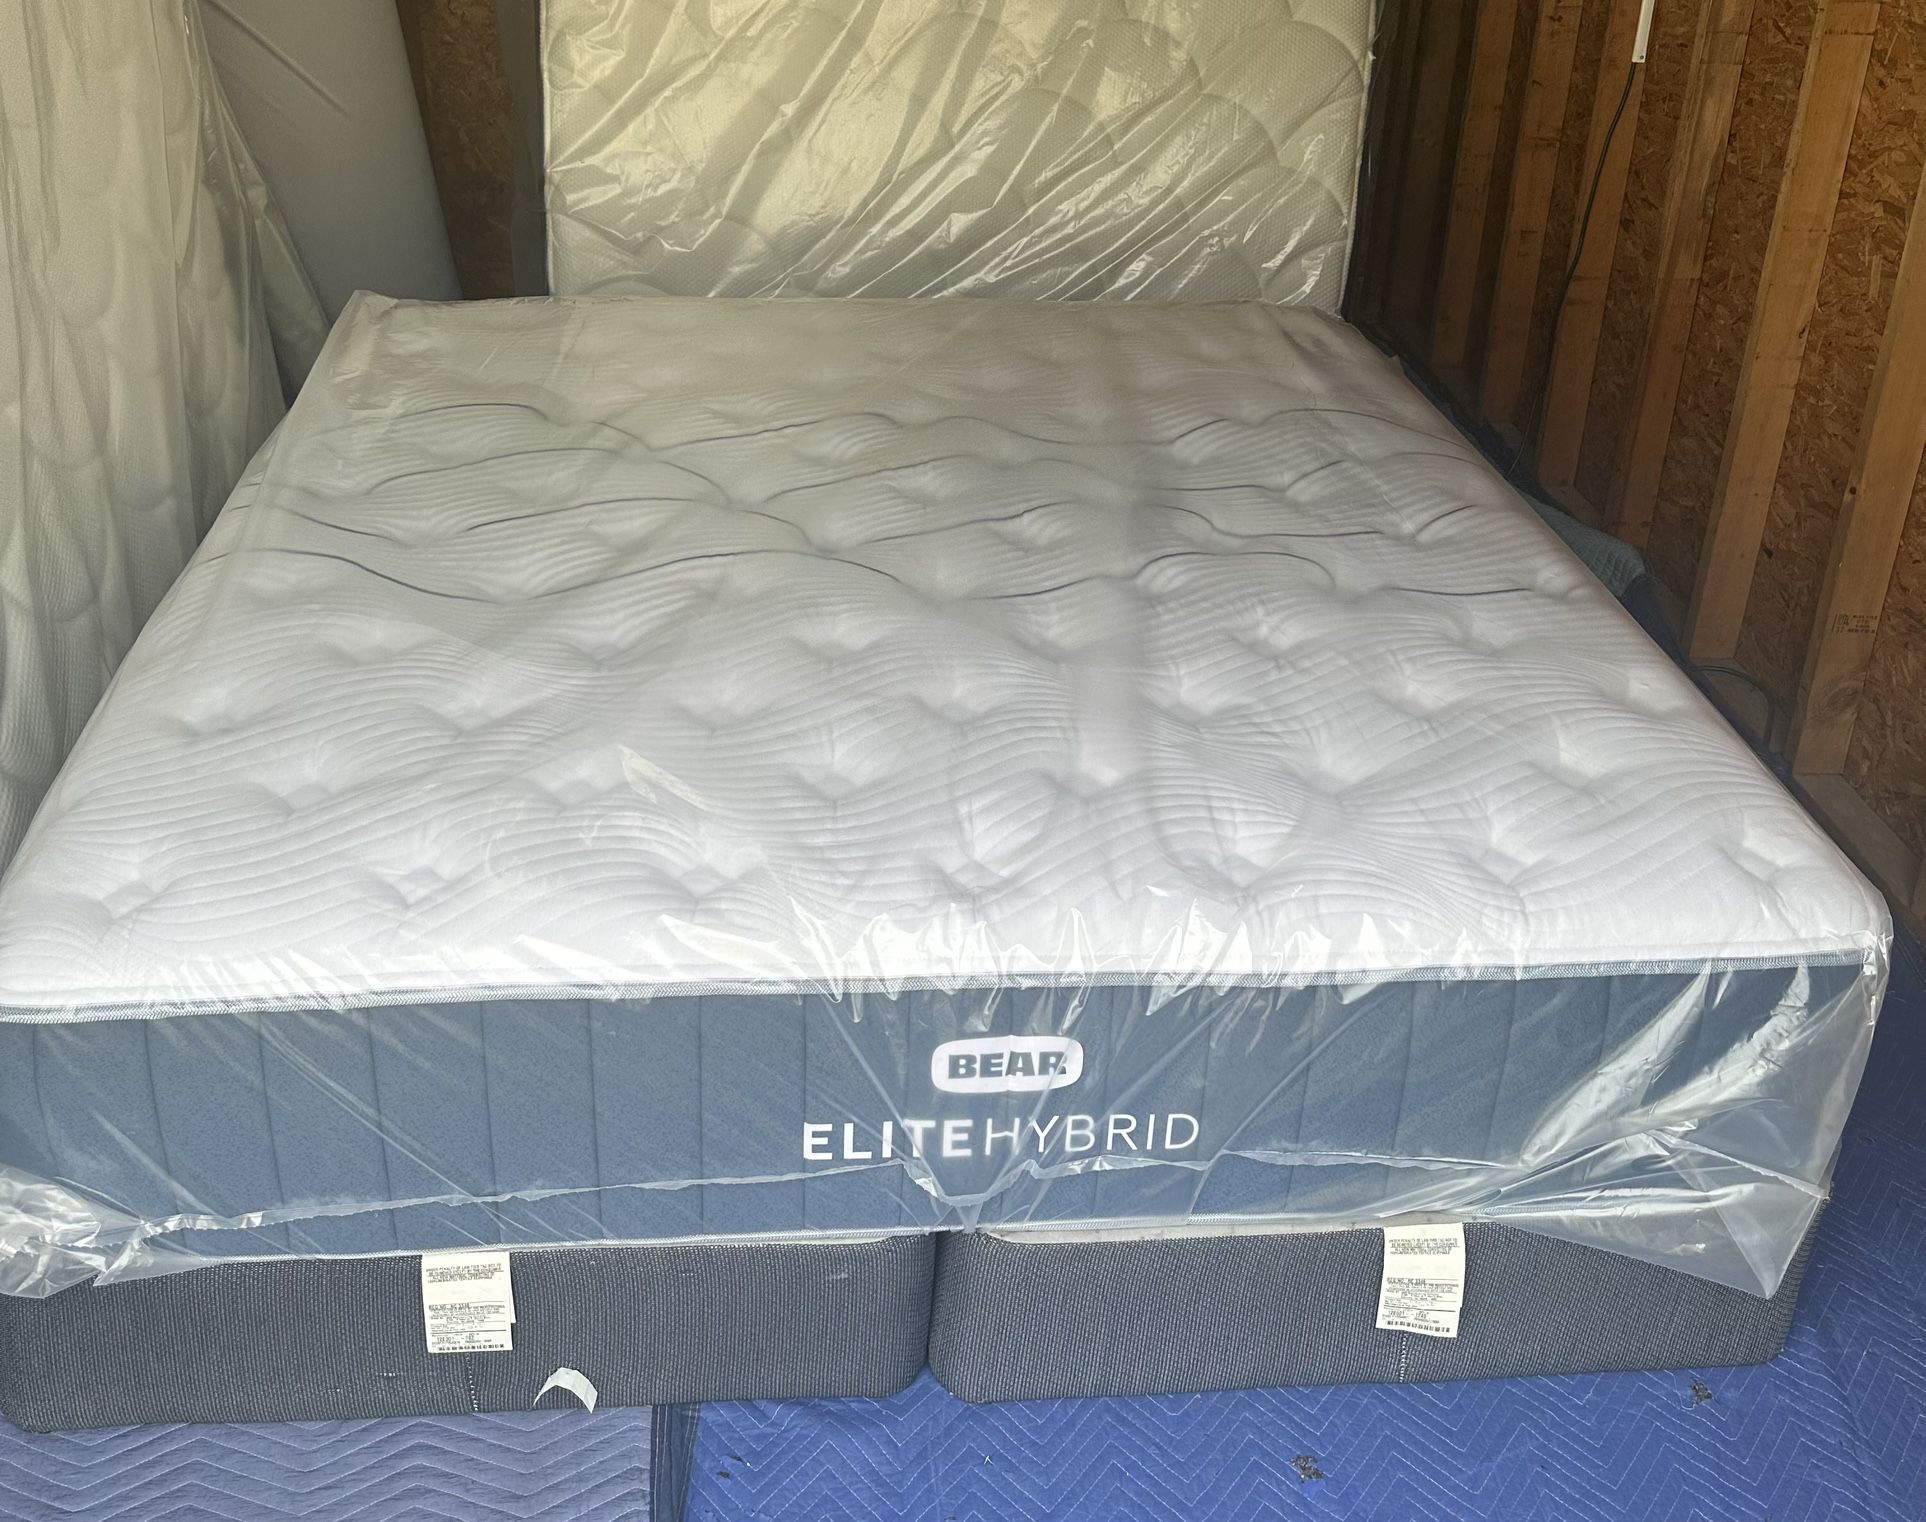 King Bear Elite Hybrid Mattress & Boxsprings (Delivery Available!)